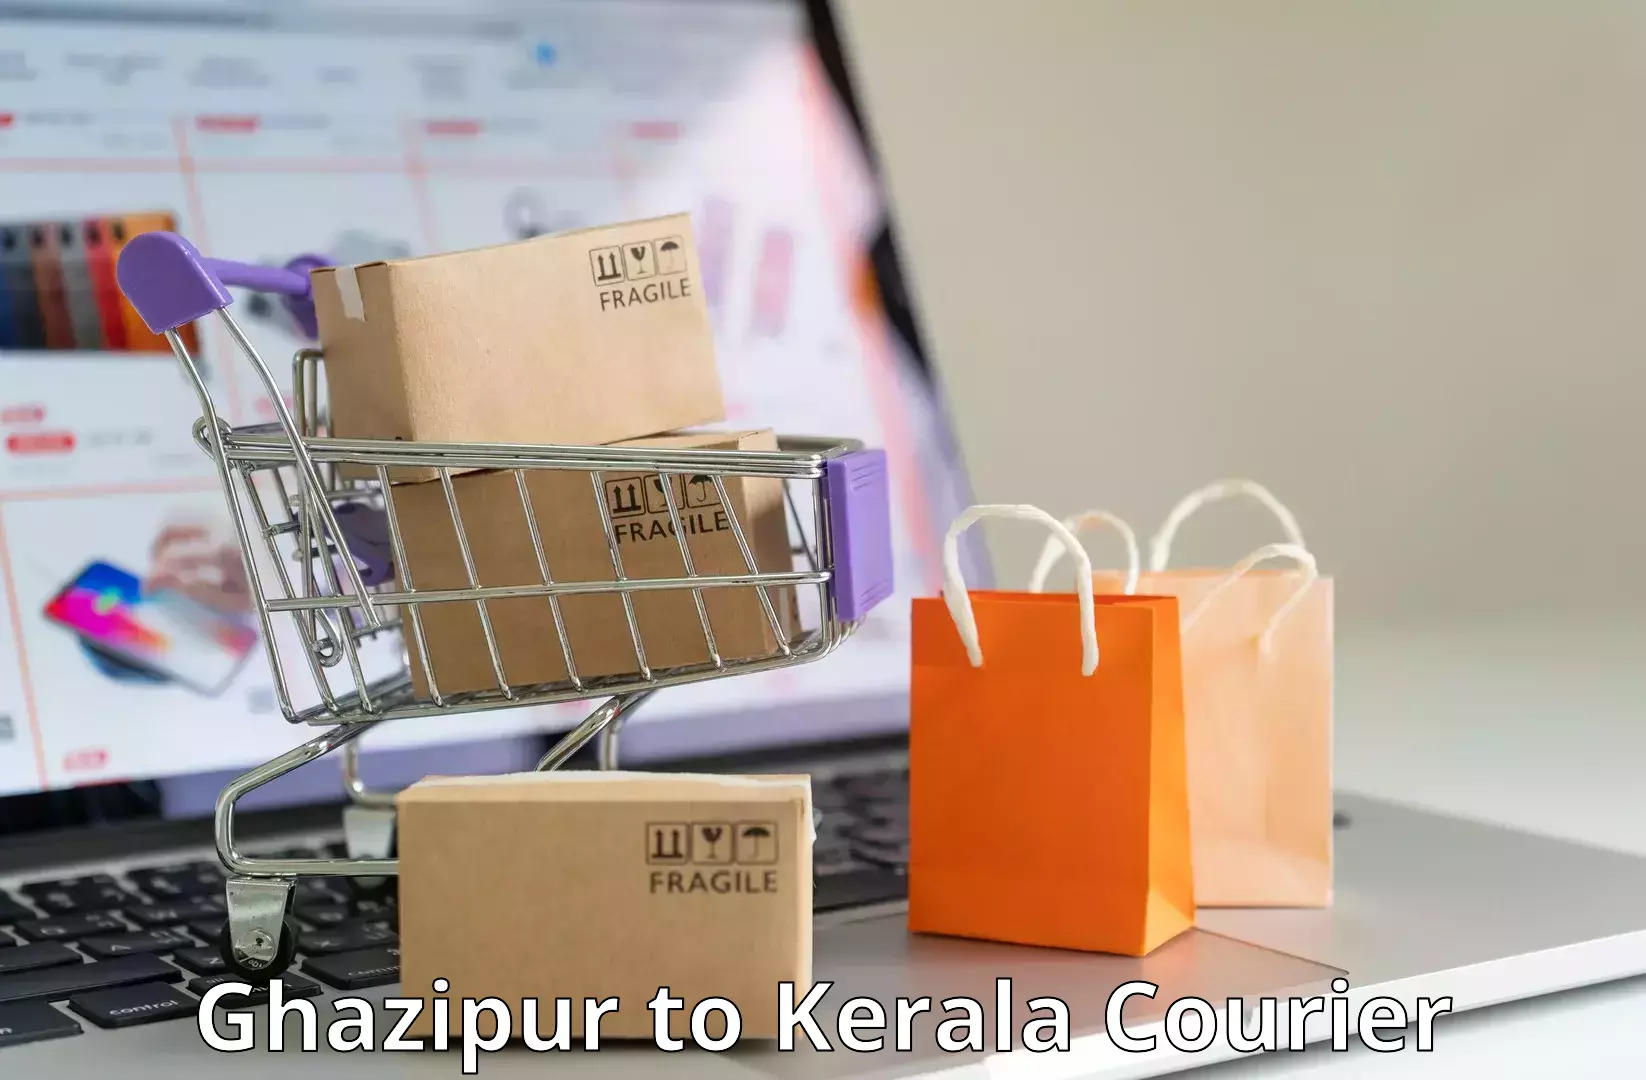 Next day courier Ghazipur to Koyilandy